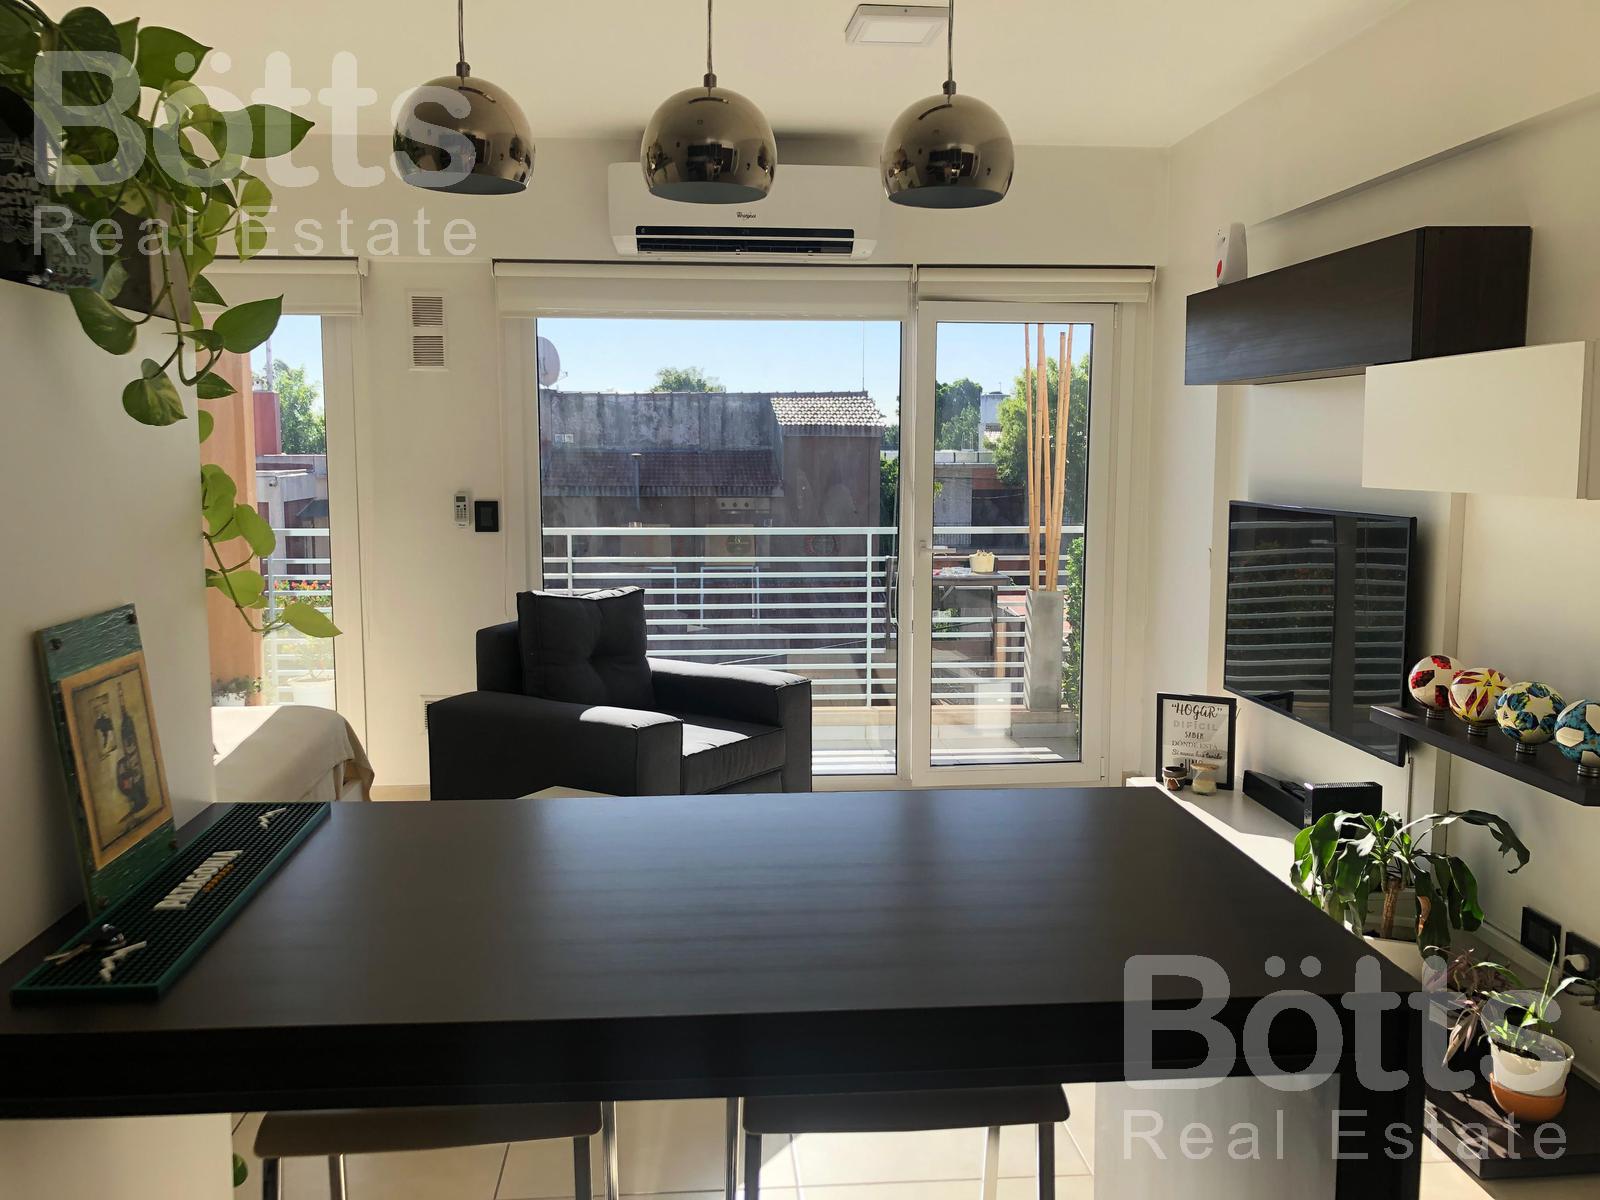 #5234736 | Sale | Apartment | Liniers (Bötts Real Estate)